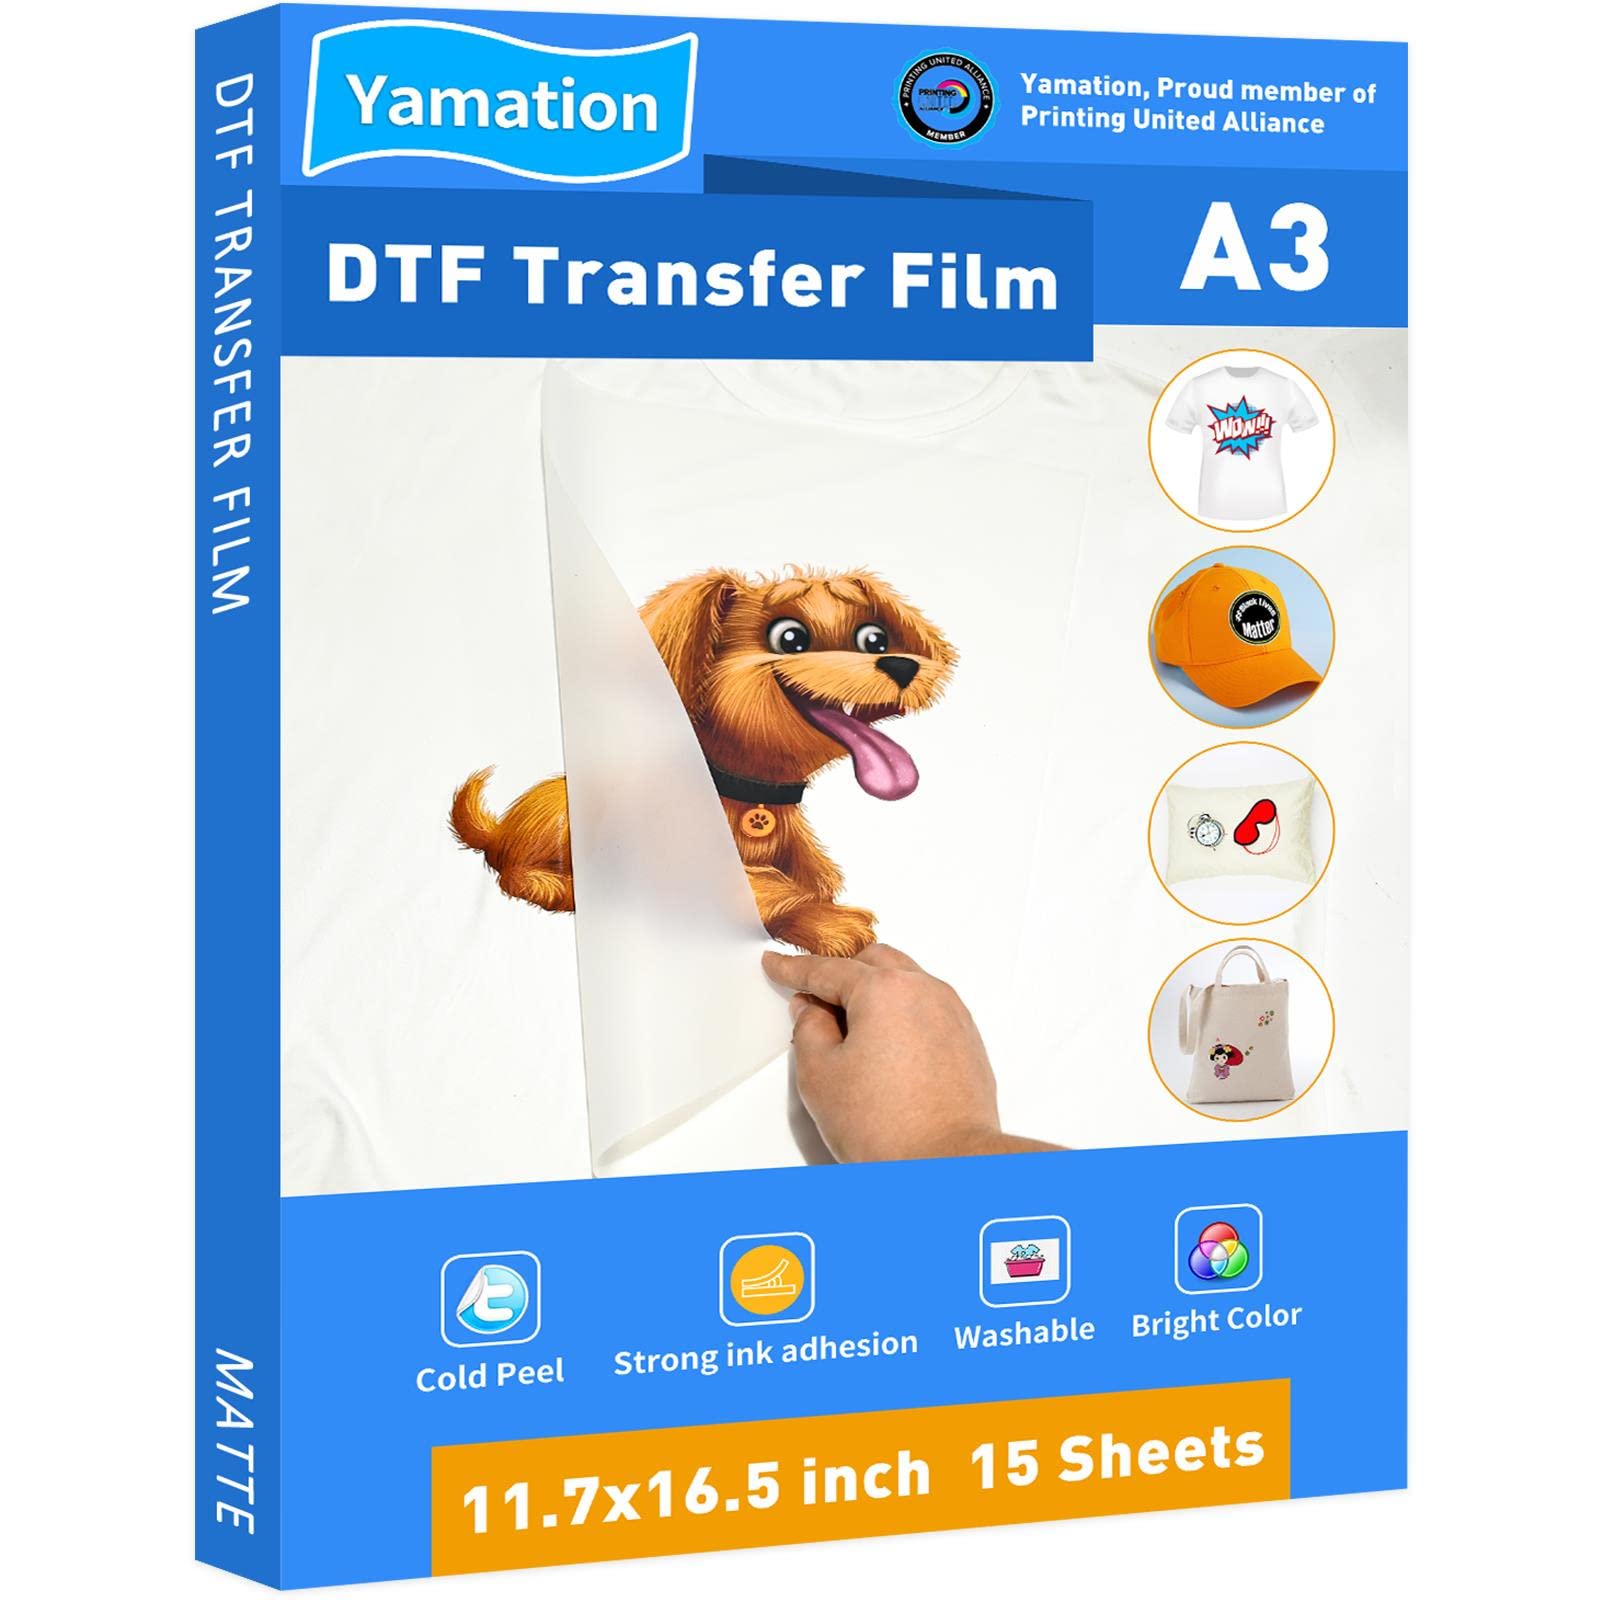 Yamation DTF Transfer Film: A3 (11.7 x 16.5) 15 Sheets Premium Double-Sided  Matte Finish PET Transfer Paper Direct to Film for T Shirts A3 15sheets